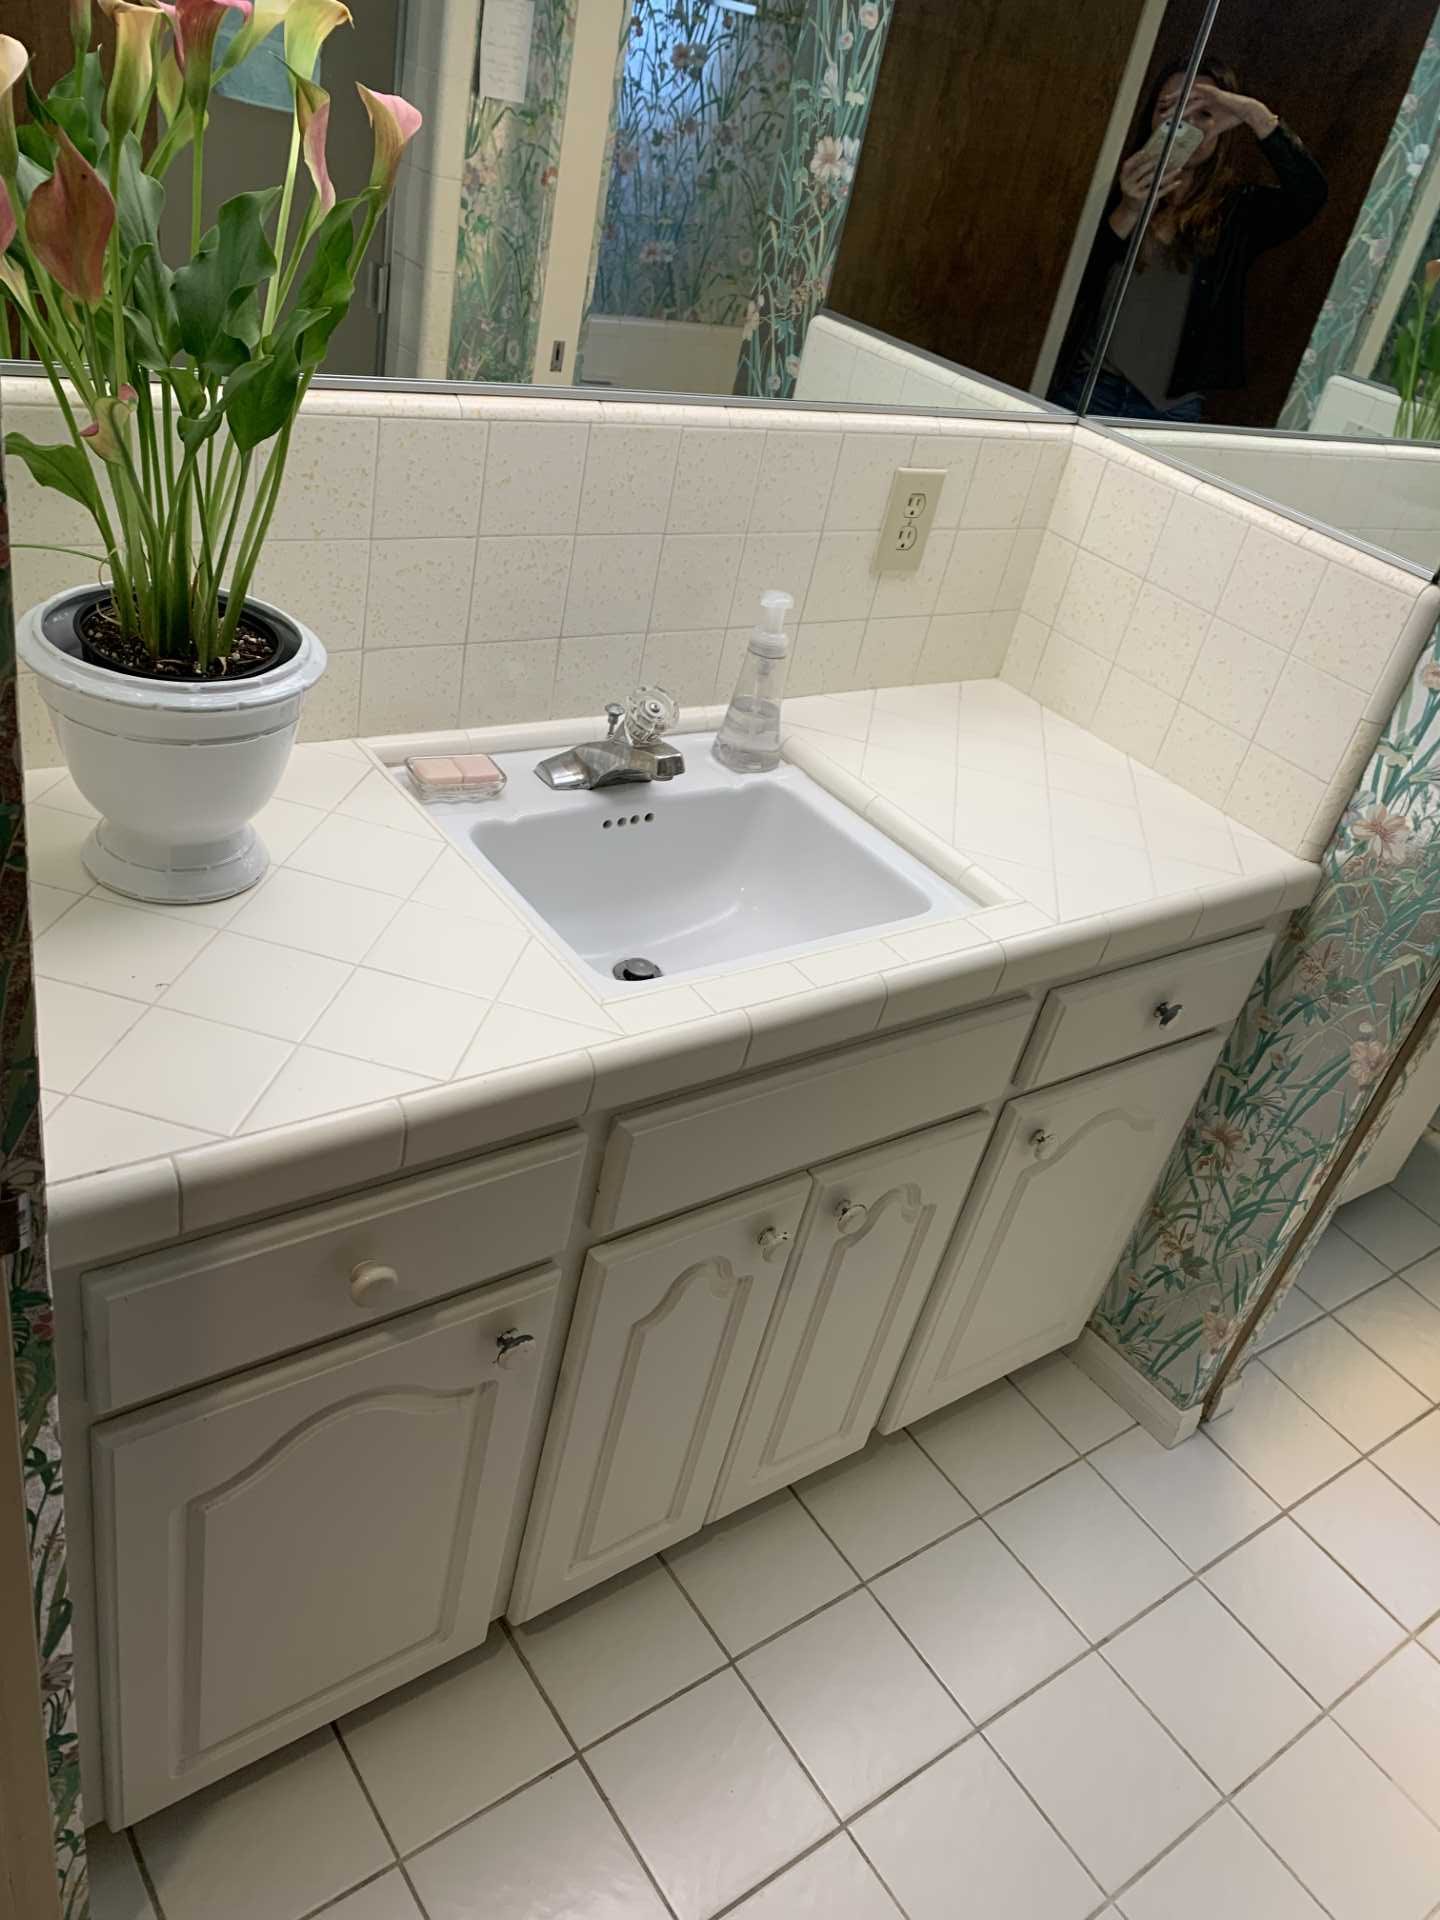 Metallic wallpaper with flowers covered the walls and ceiling in this 'before' bathroom. Also included are vanities that are separated by a wall, both of which have tiled countertops.